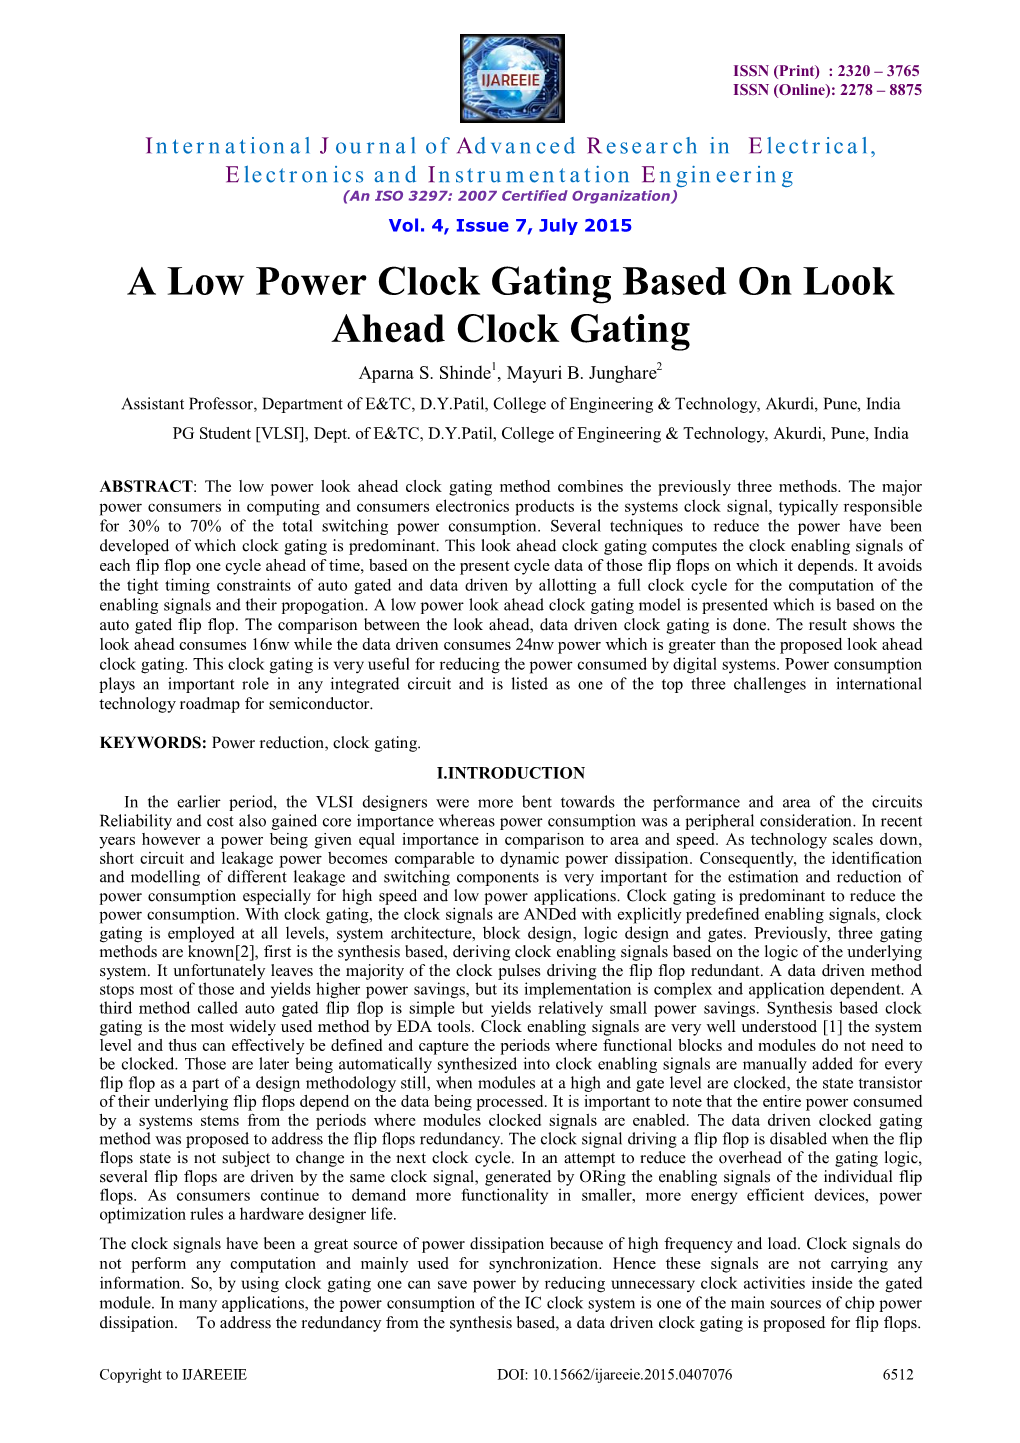 A Low Power Clock Gating Based on Look Ahead Clock Gating Aparna S